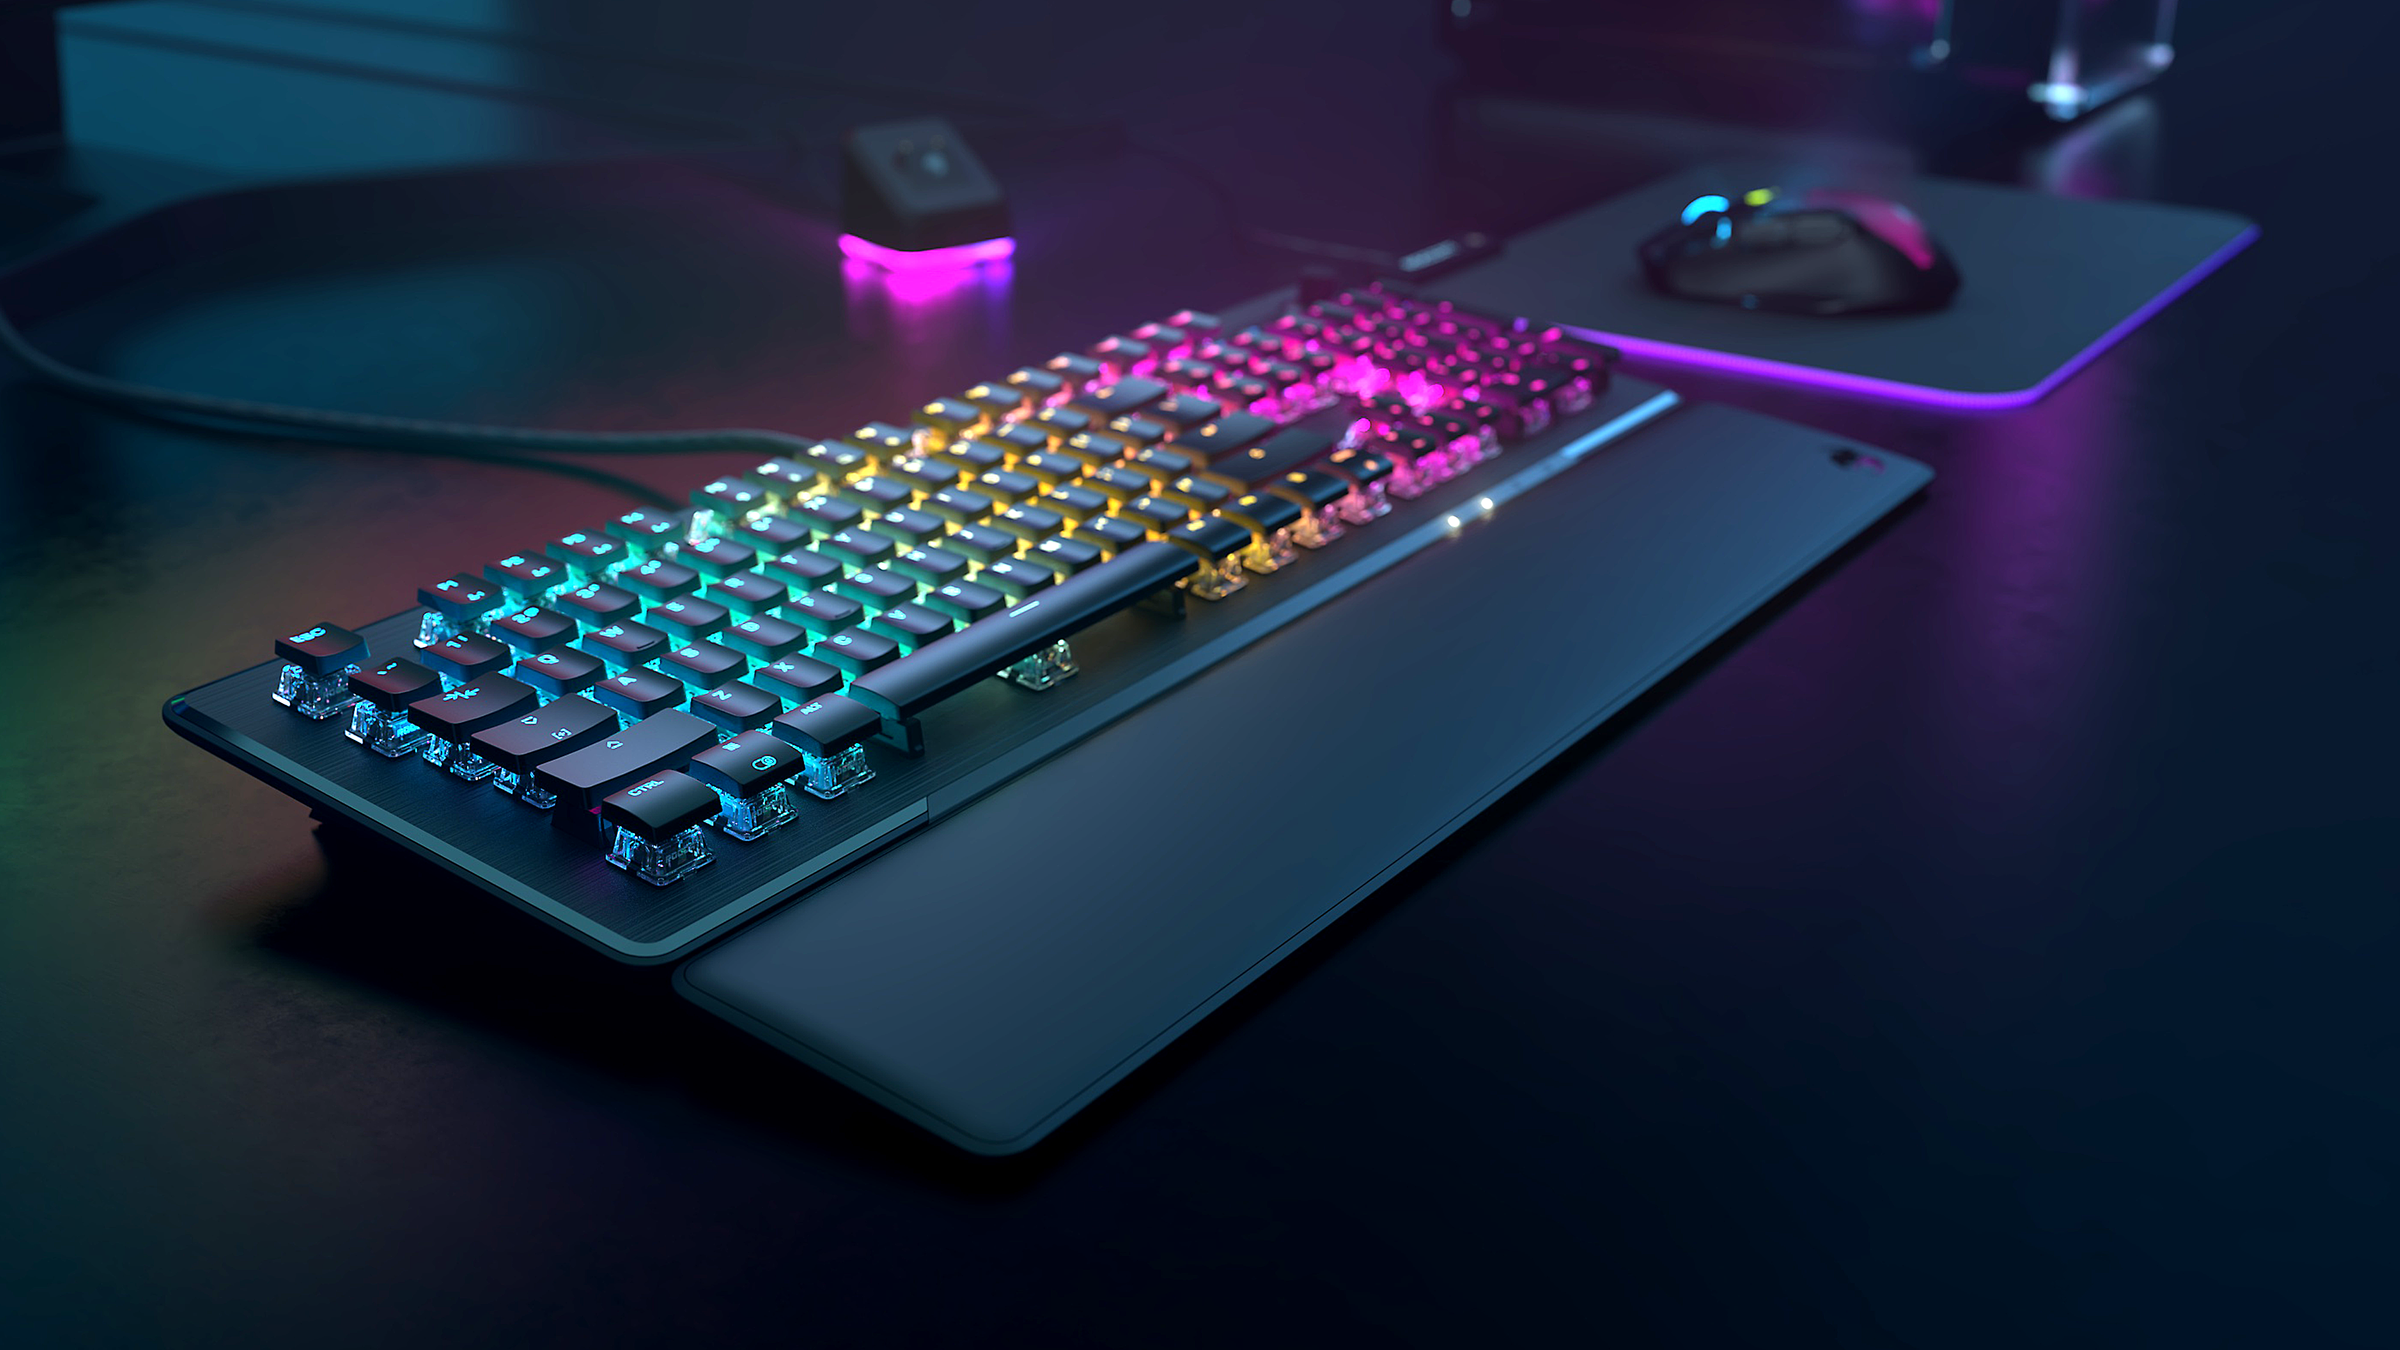 We now have all the perfect RGB gaming gear, but the software has